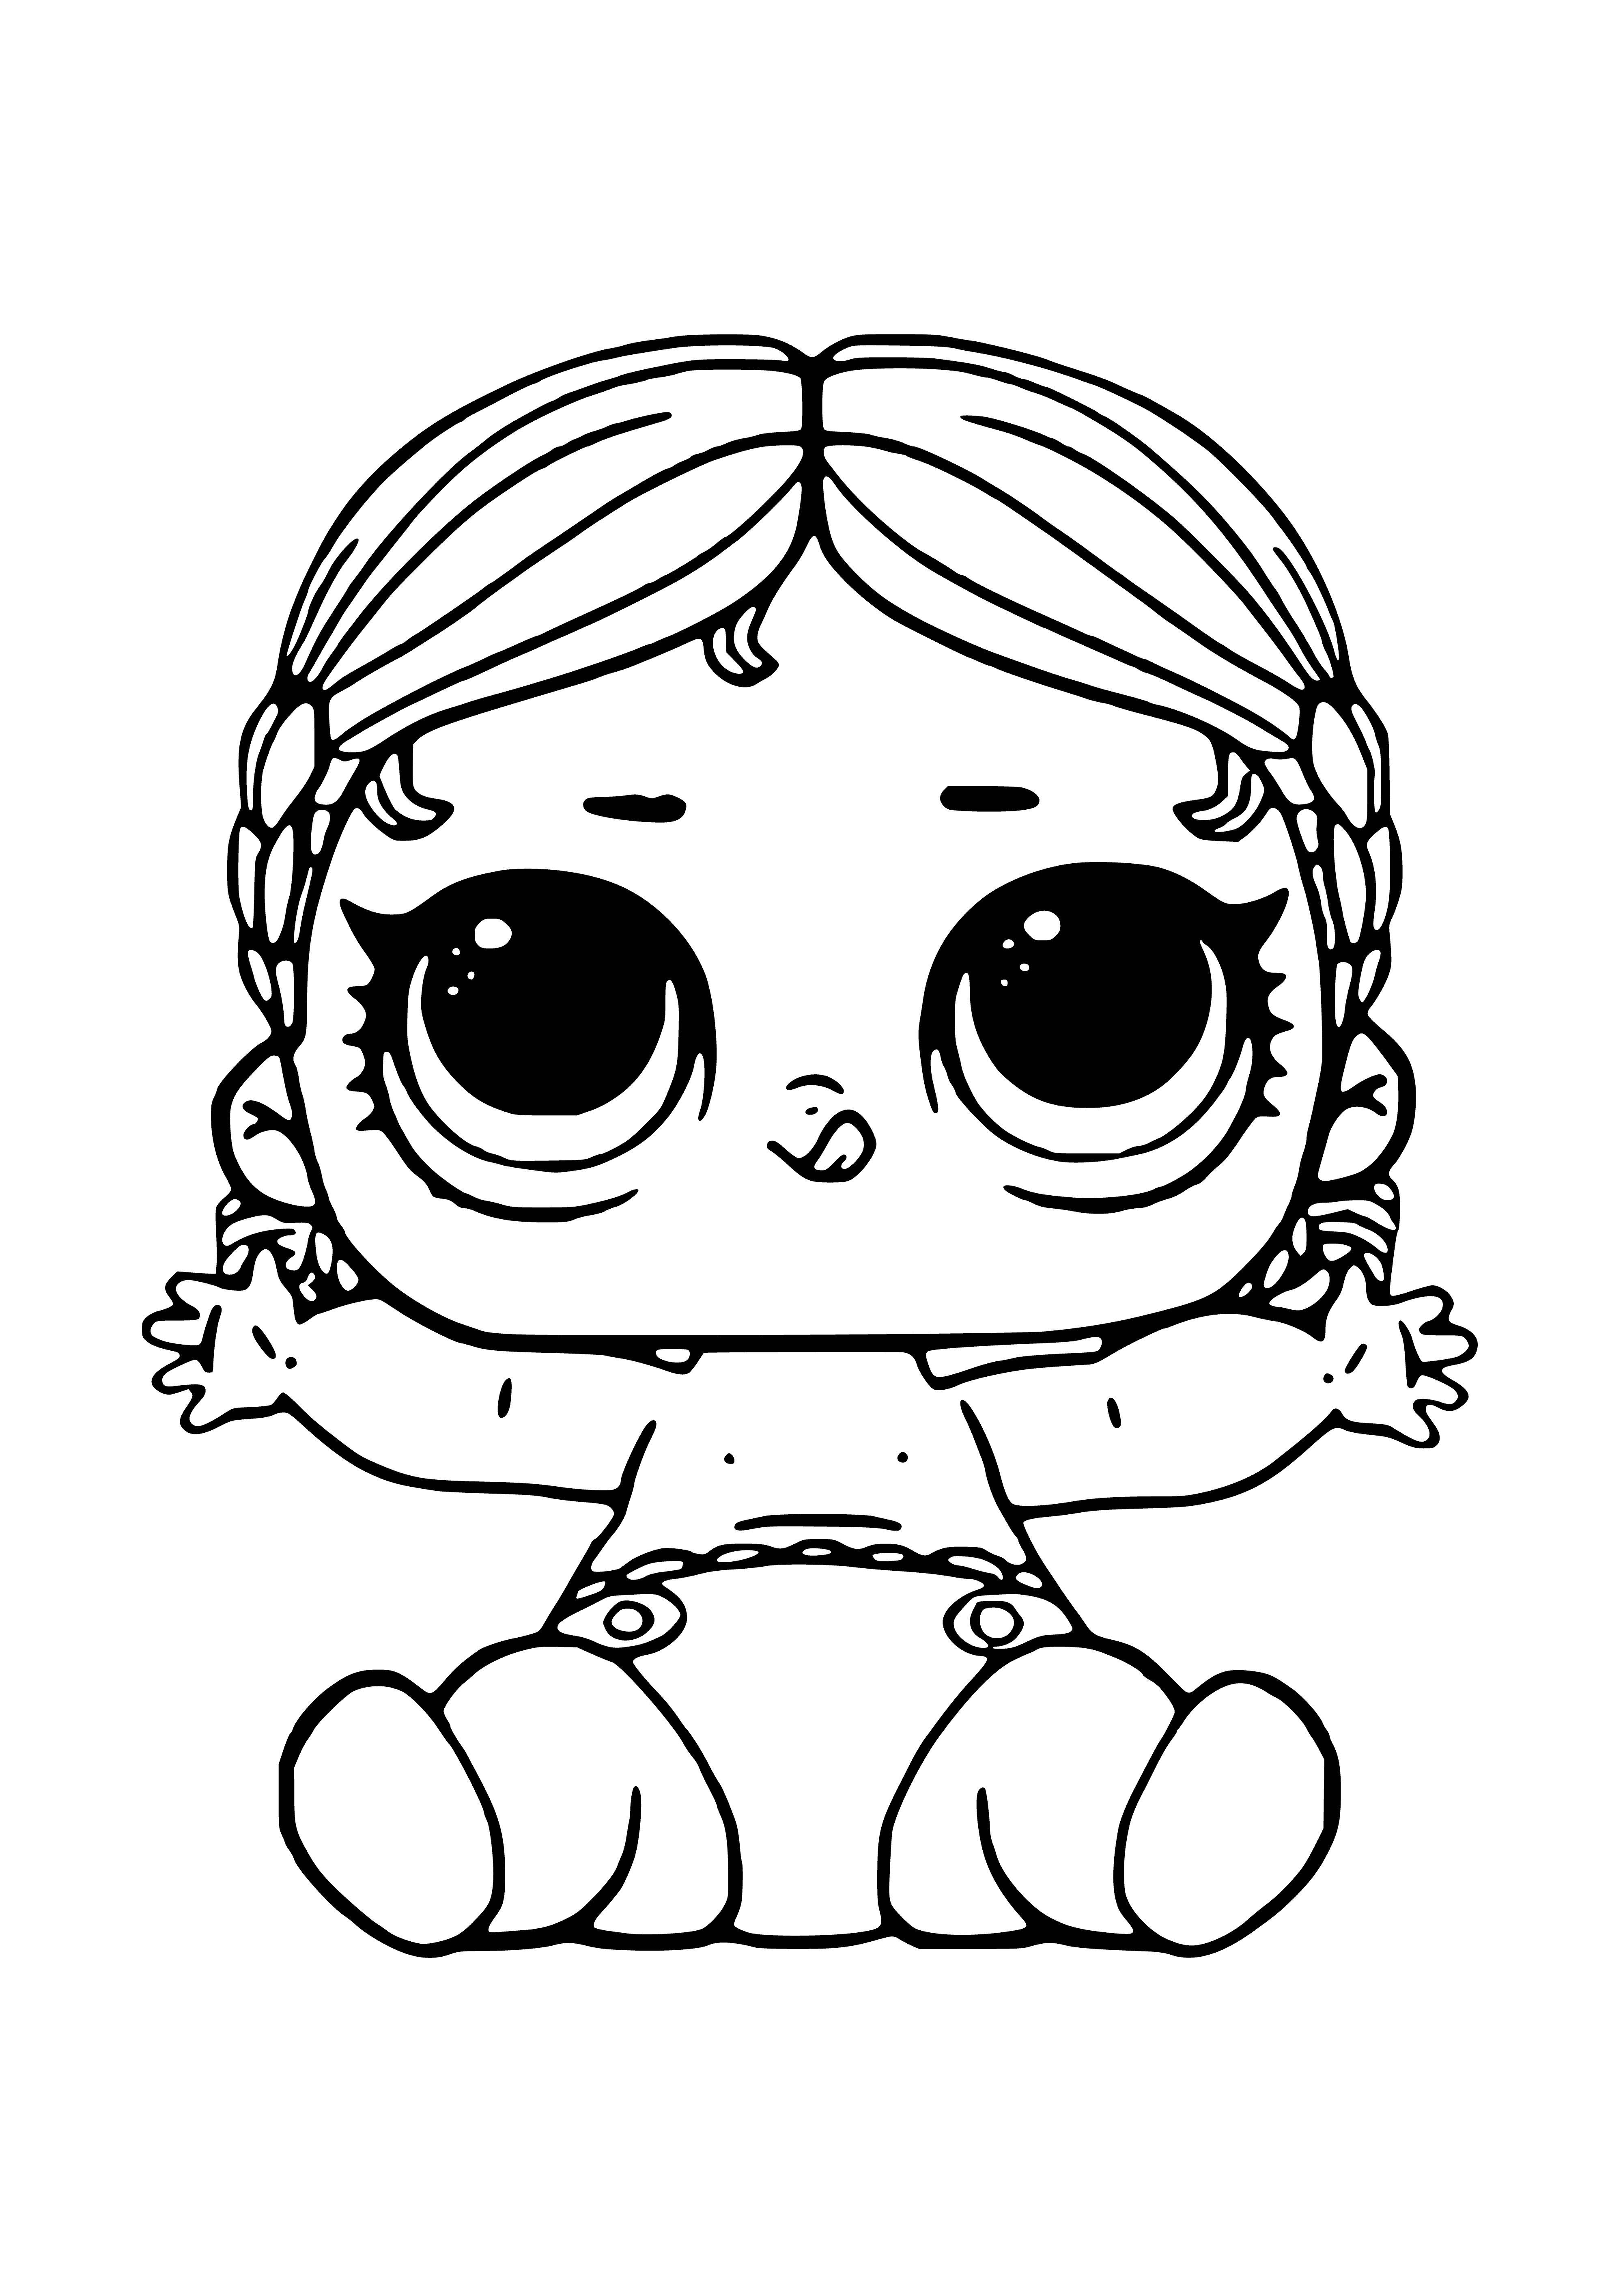 coloring page: Girl in tutu stands in front of mirror, L.O.L. shirt & ballet slippers. Serious expression as she concentrates. #ballet #dressup